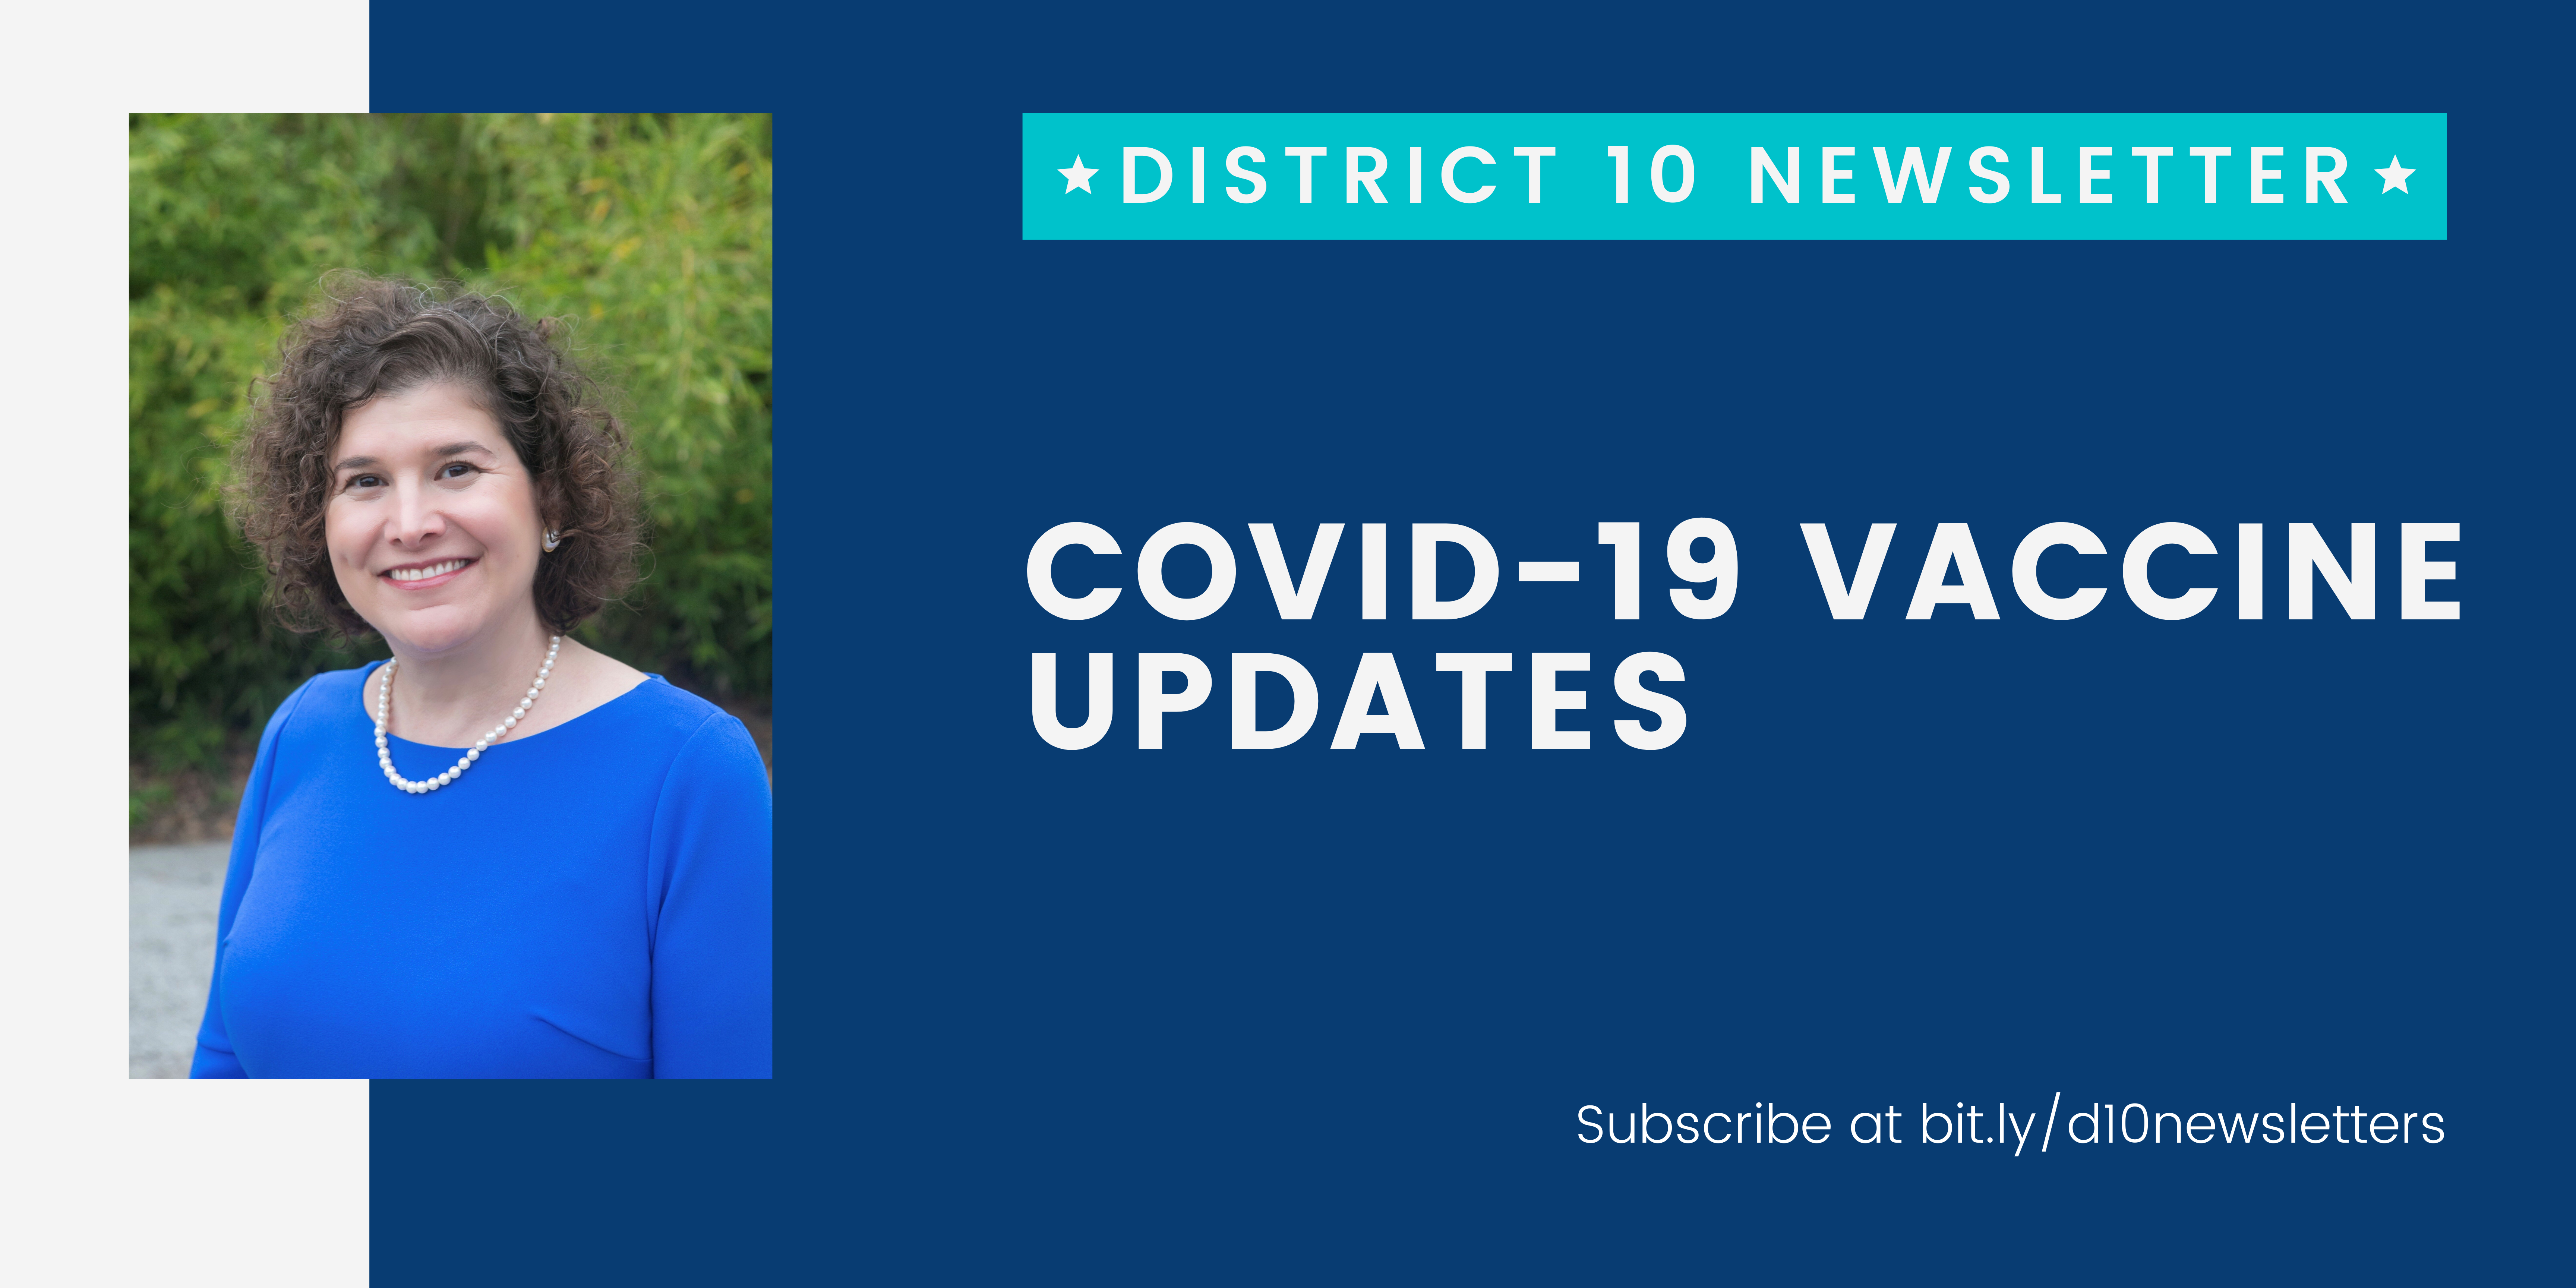 District 10 Newsletter; COVID-19 Vaccine Updates. Subscribe at bit.ly/d10newsletters